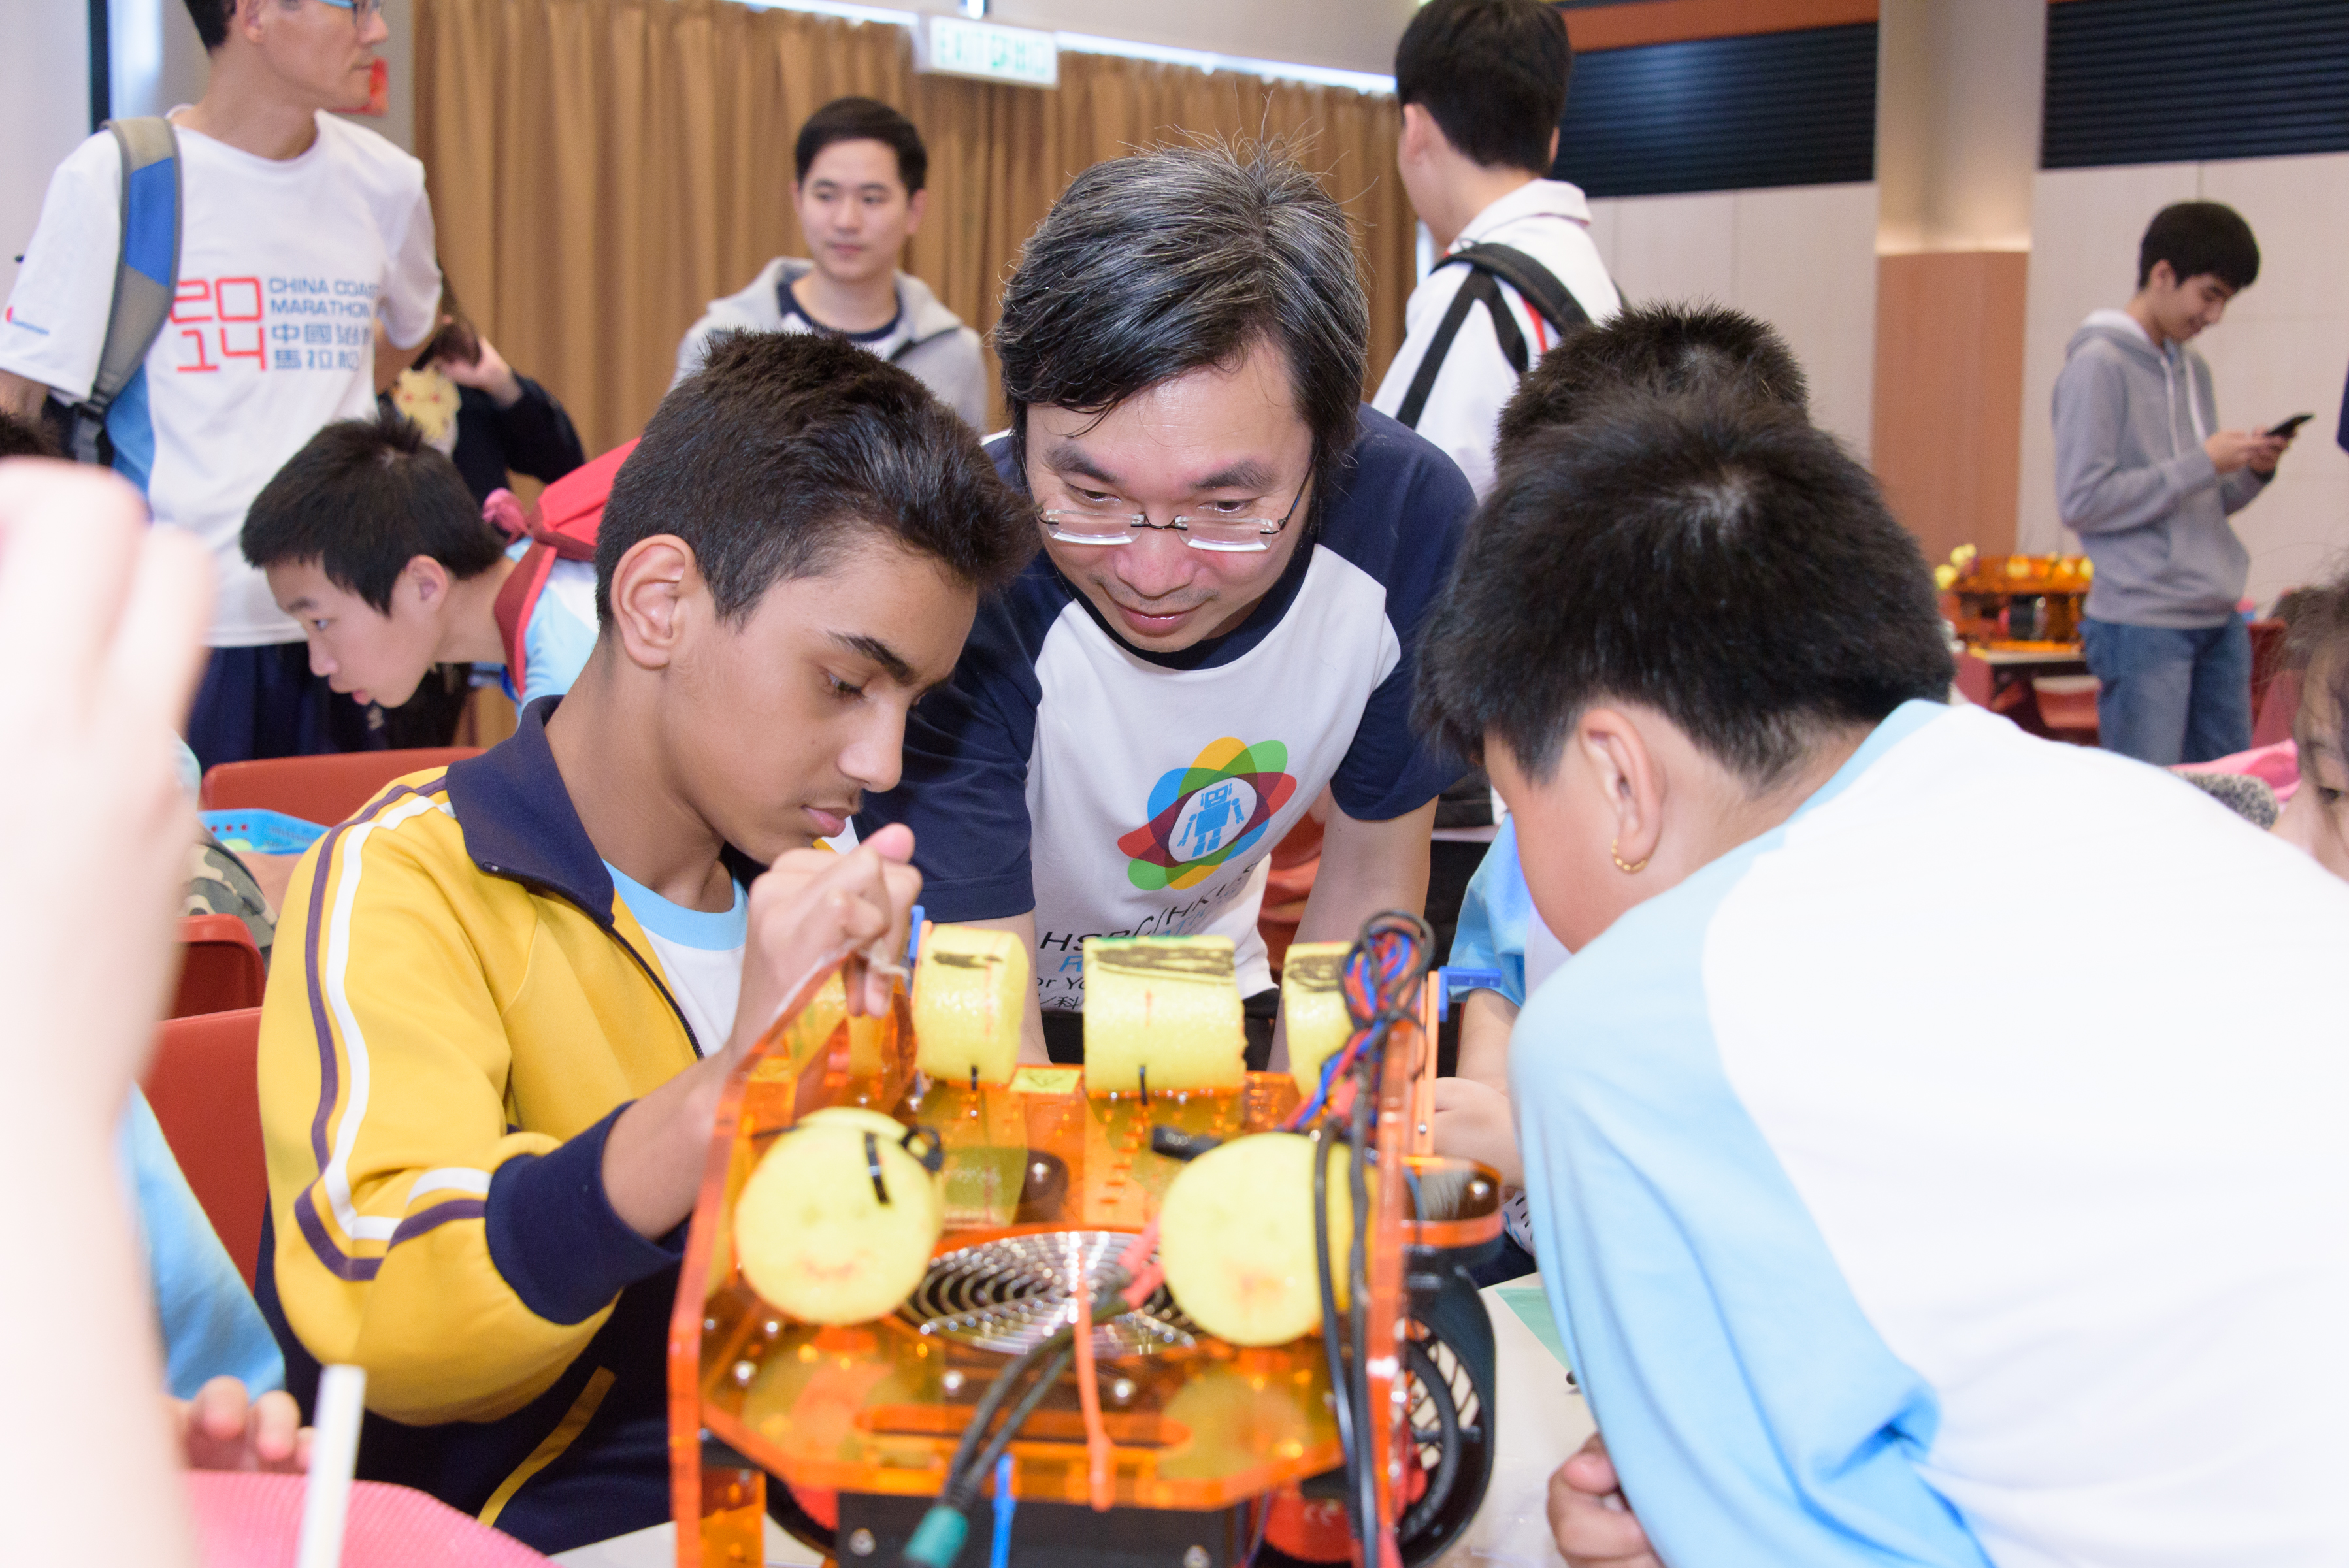 Prof. Tim Woo is keen to promote diversity and inclusion in engineering education among primary and secondary school students.